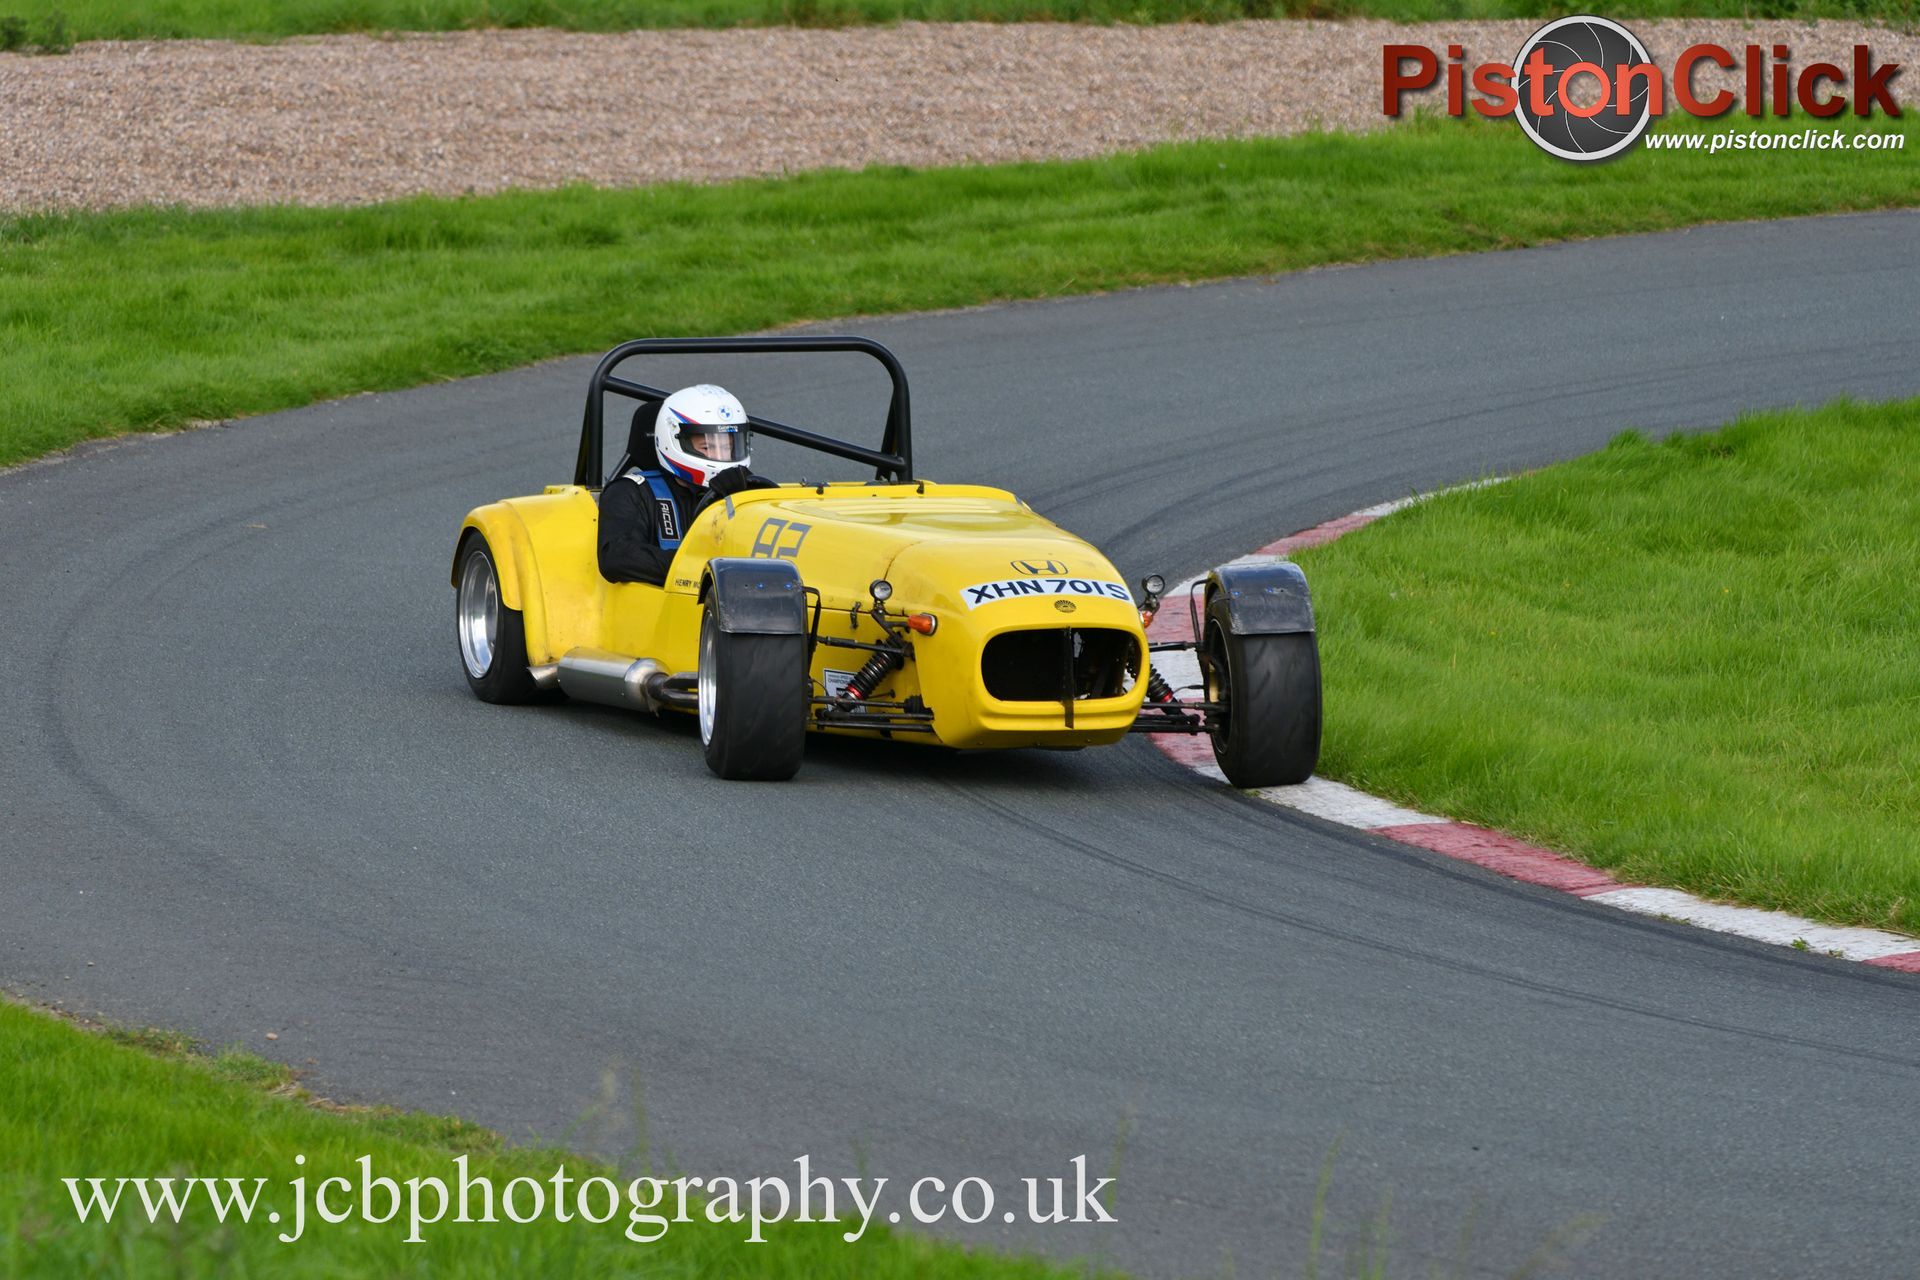 BARC Yorkshire Centre organised the Summer Championship Hillclimb event on Sunday 27th August as part of the Harewood Championship